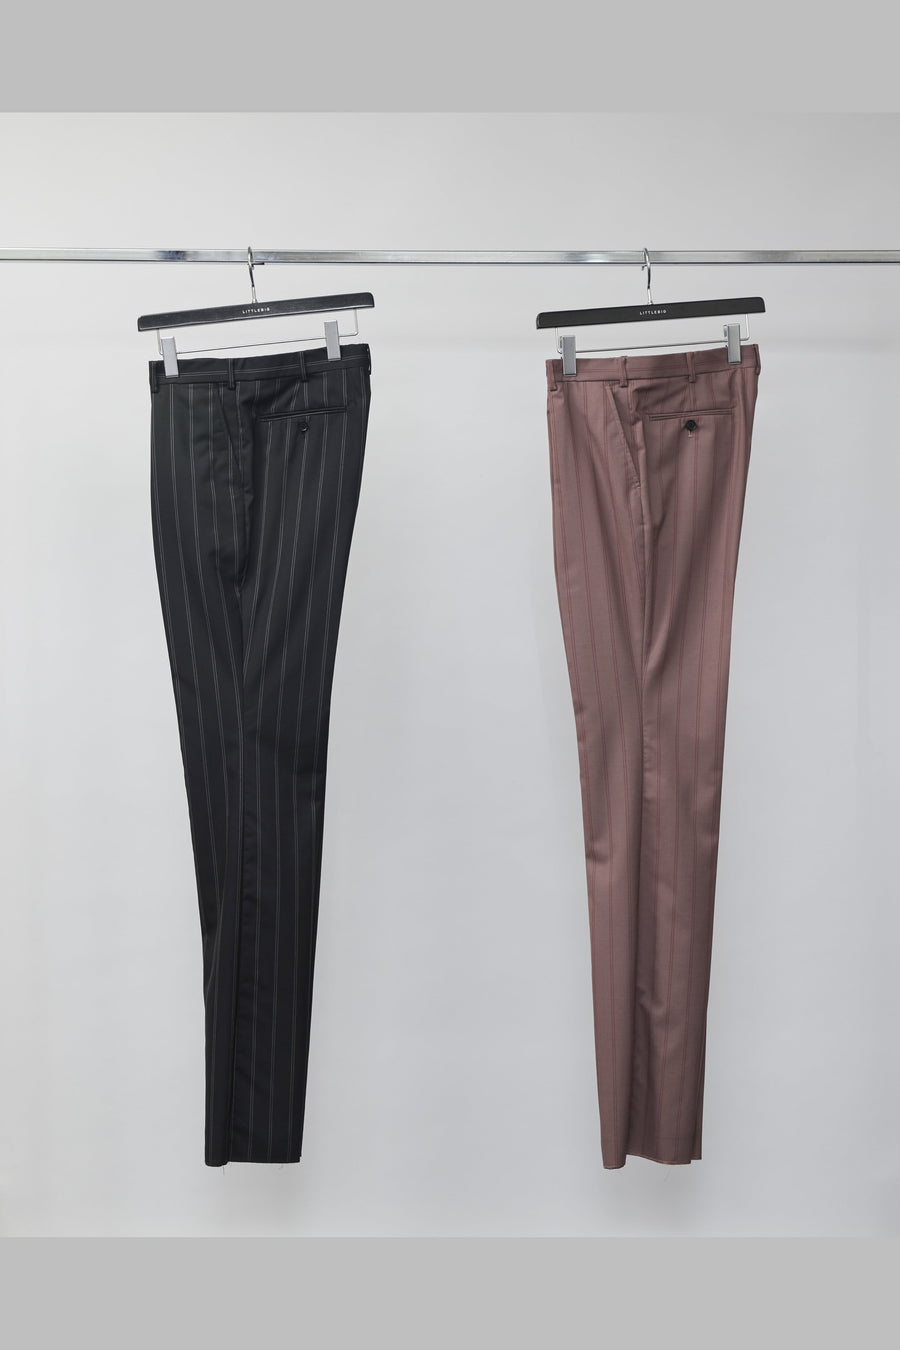 LITTLEBIG  Tucked Flare Trousers（Black or Pink）